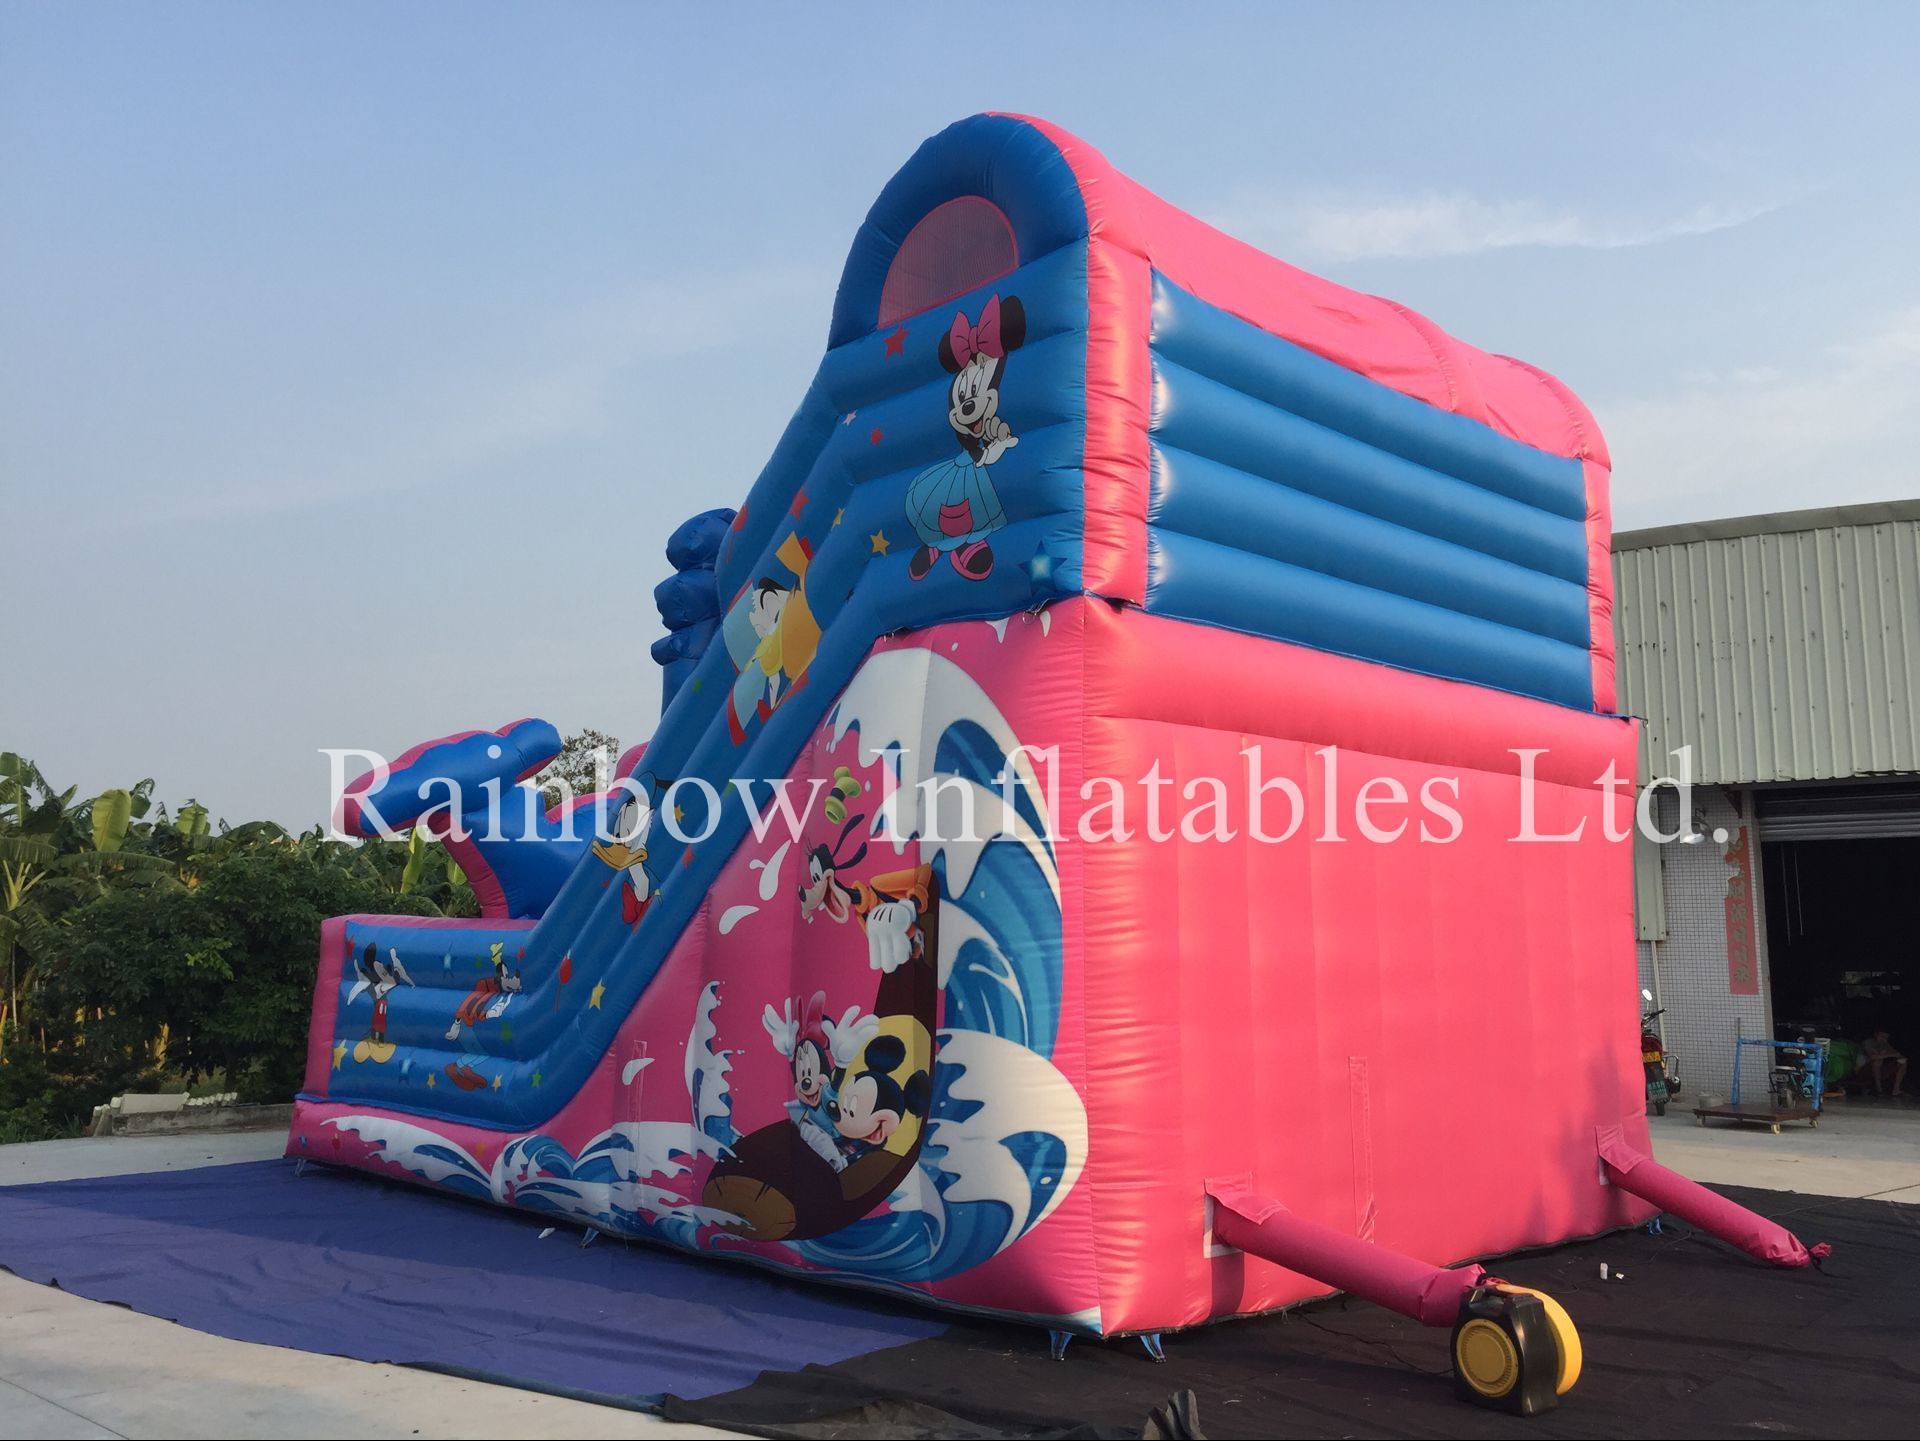 RB6073（9x6m） Inflatable Customize Cartoon Theme Slide for Kids and Children, Inflatable High Slide